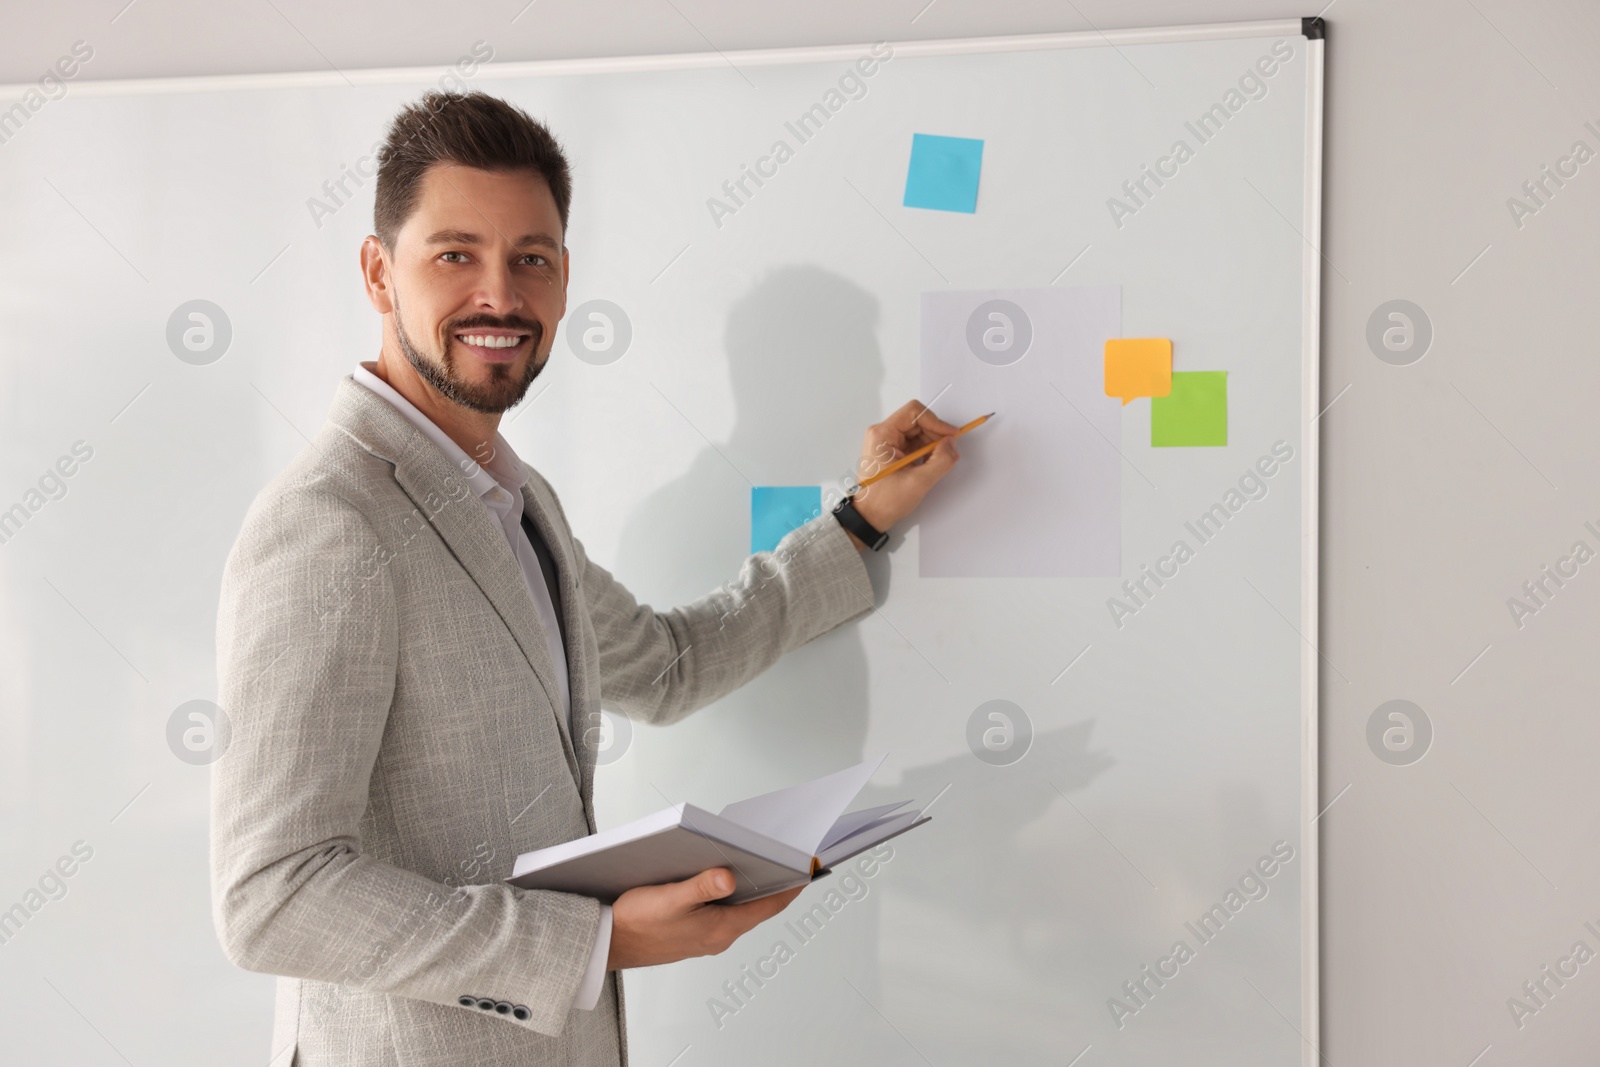 Photo of Happy teacher with book explaining something at whiteboard in classroom